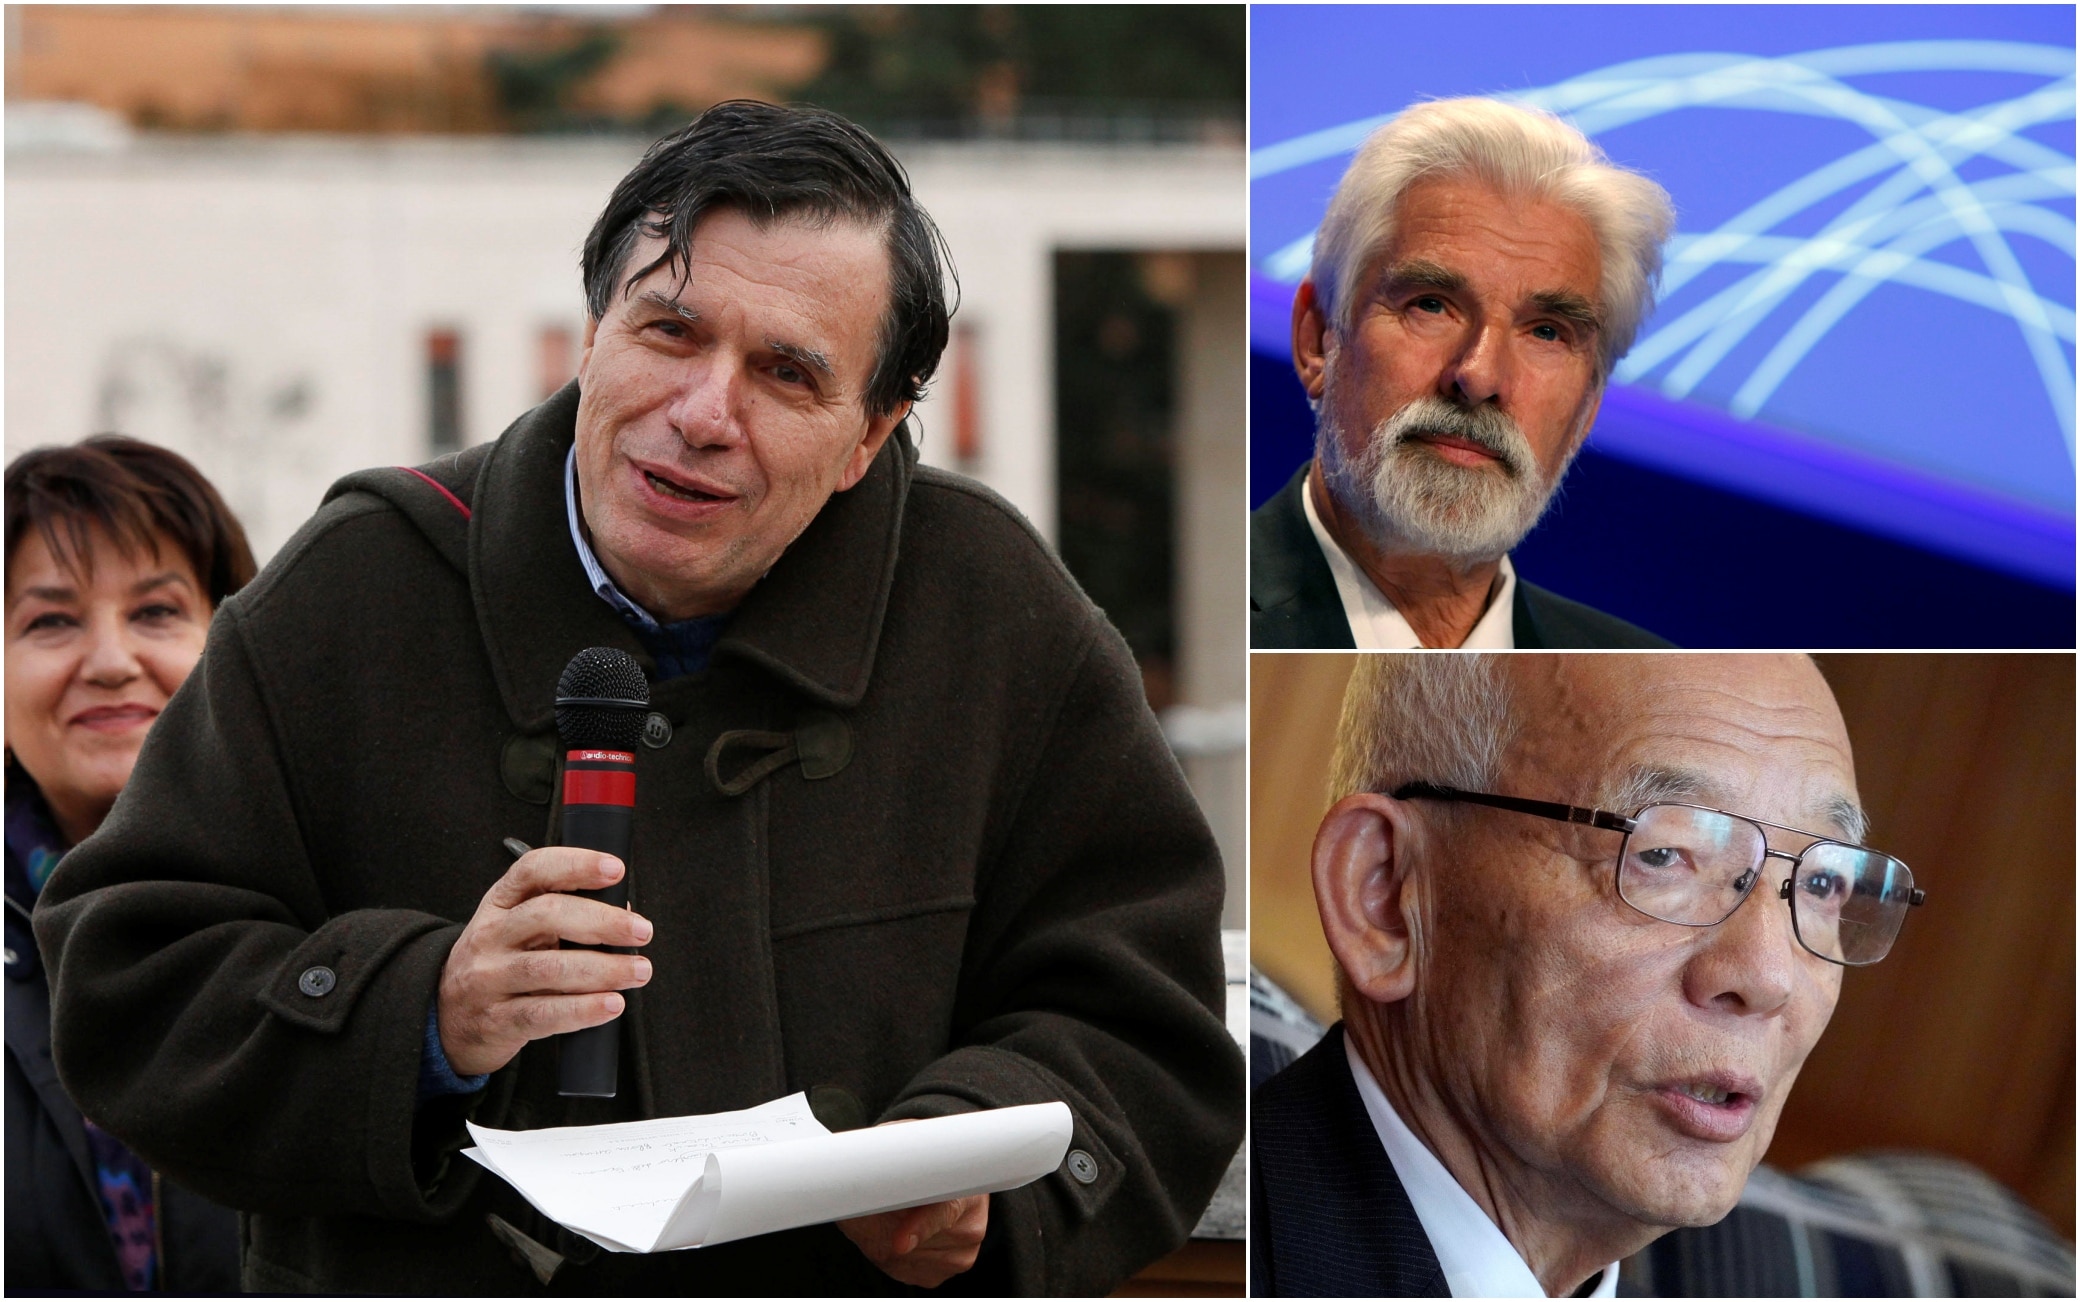 Parisi, Manabe, Hasselmann: who are the winners of the Nobel Prize in Physics 2021